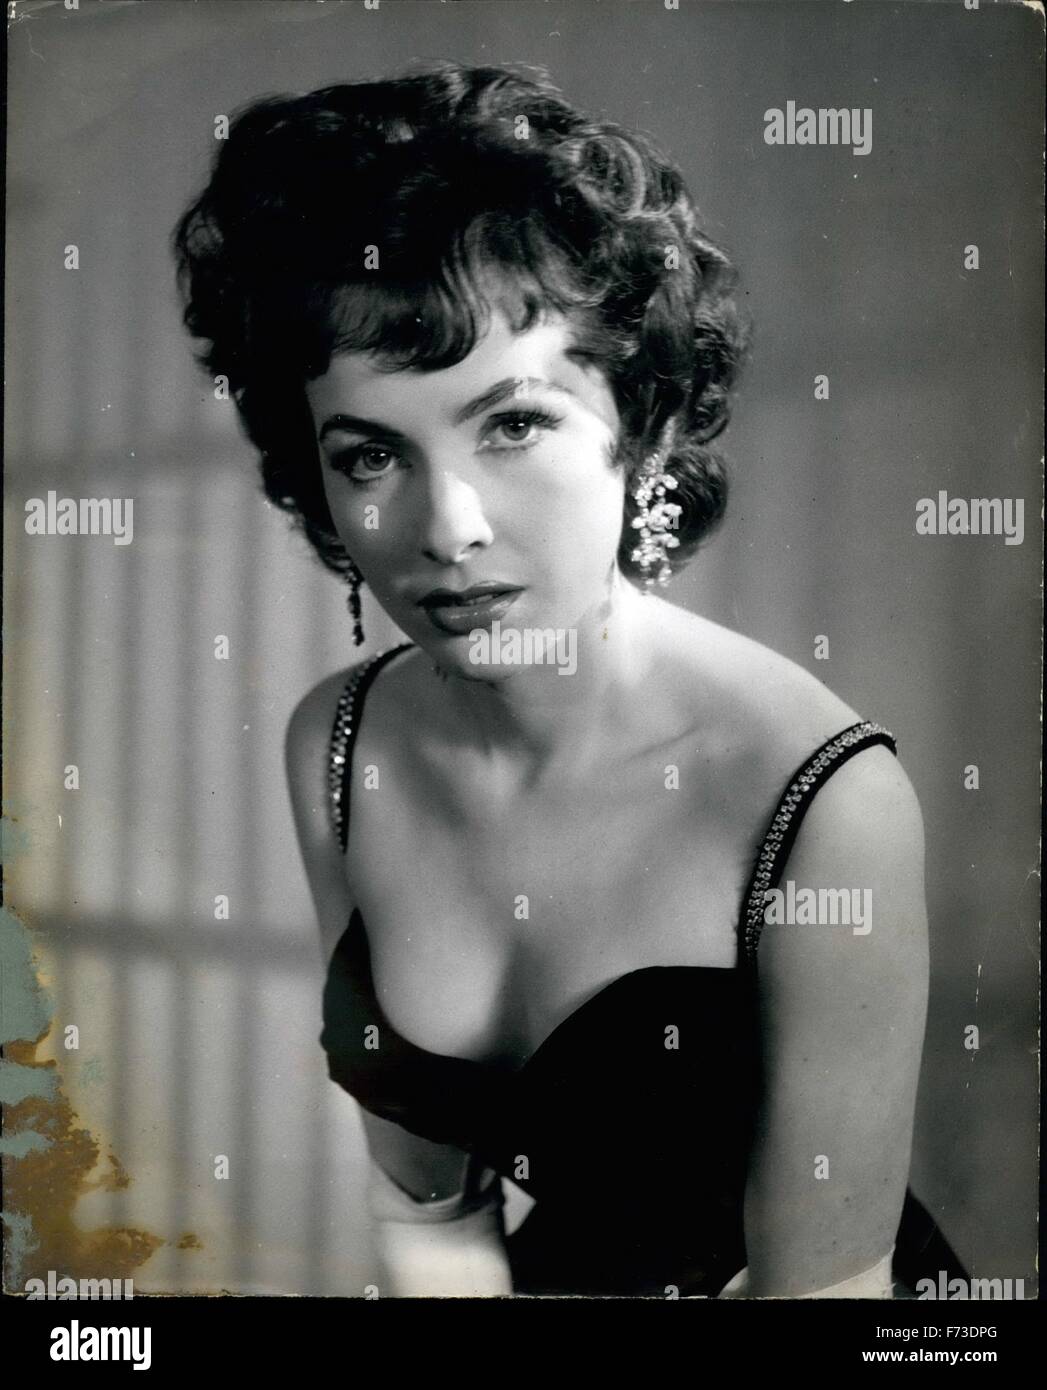 1959 - Mara Lane - Britain's Monroe : Mara, the girl with a future without a ceiling, in her latest studio picture, by John Pratt. © Keystone Pictures USA/ZUMAPRESS.com/Alamy Live News Stock Photo